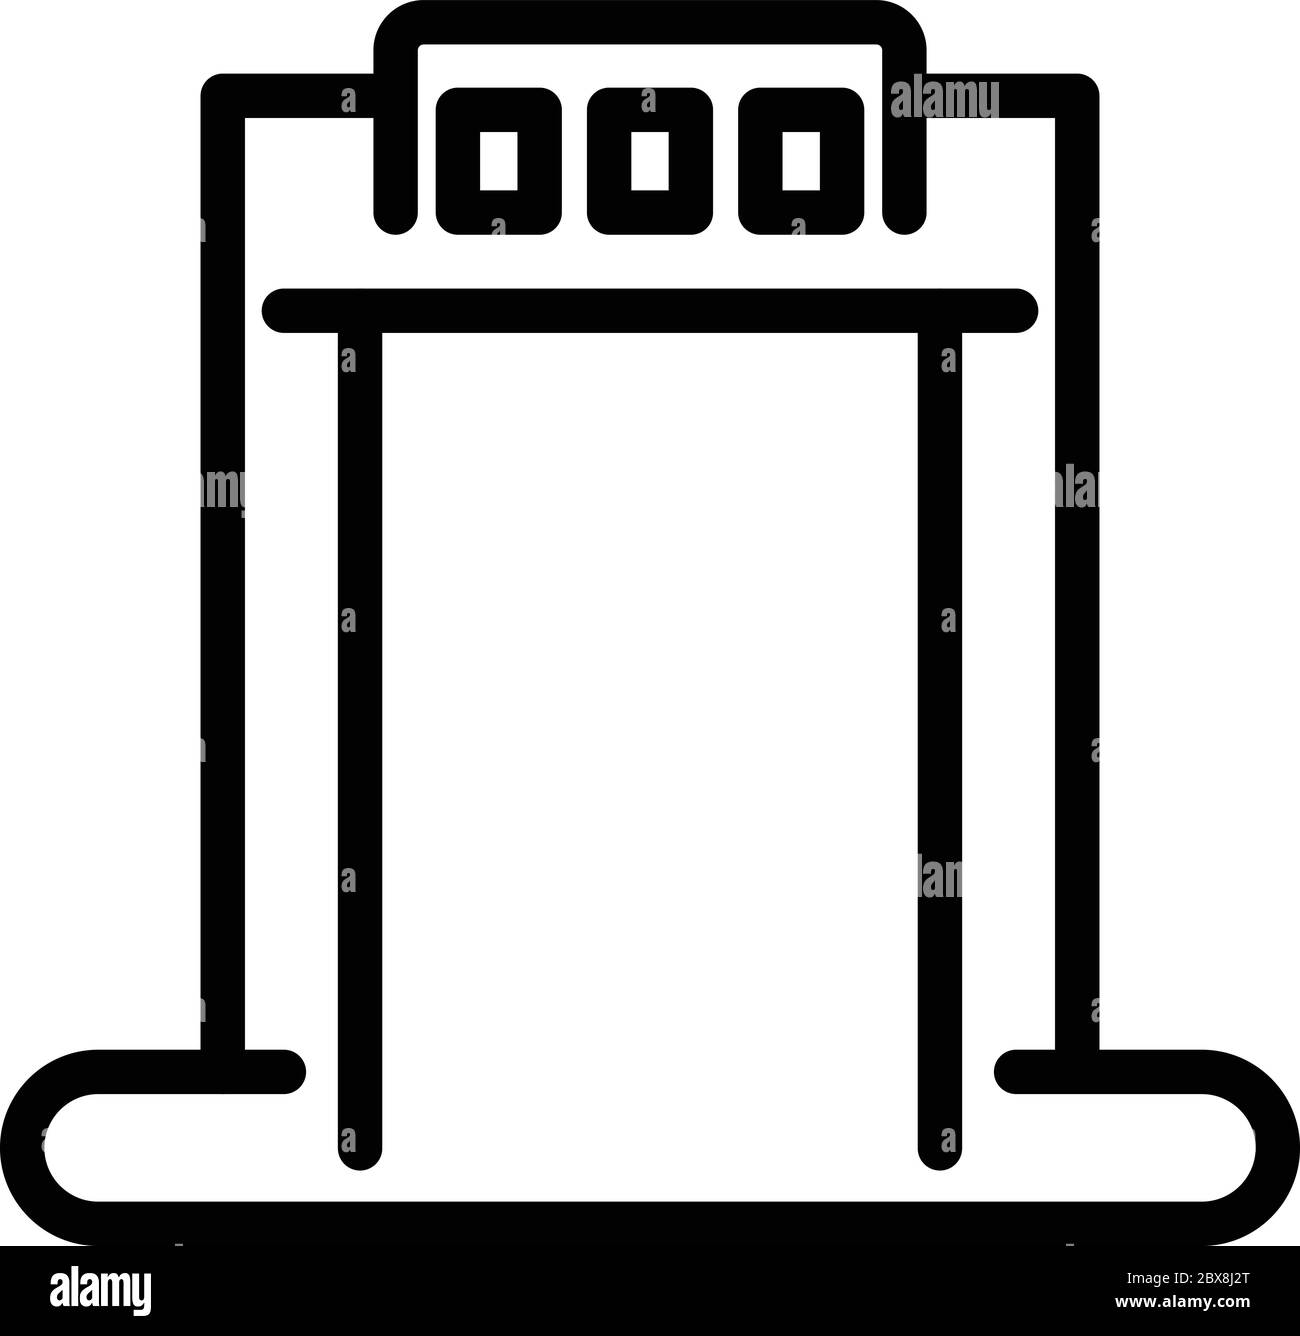 System metal detector icon, outline style Stock Vector